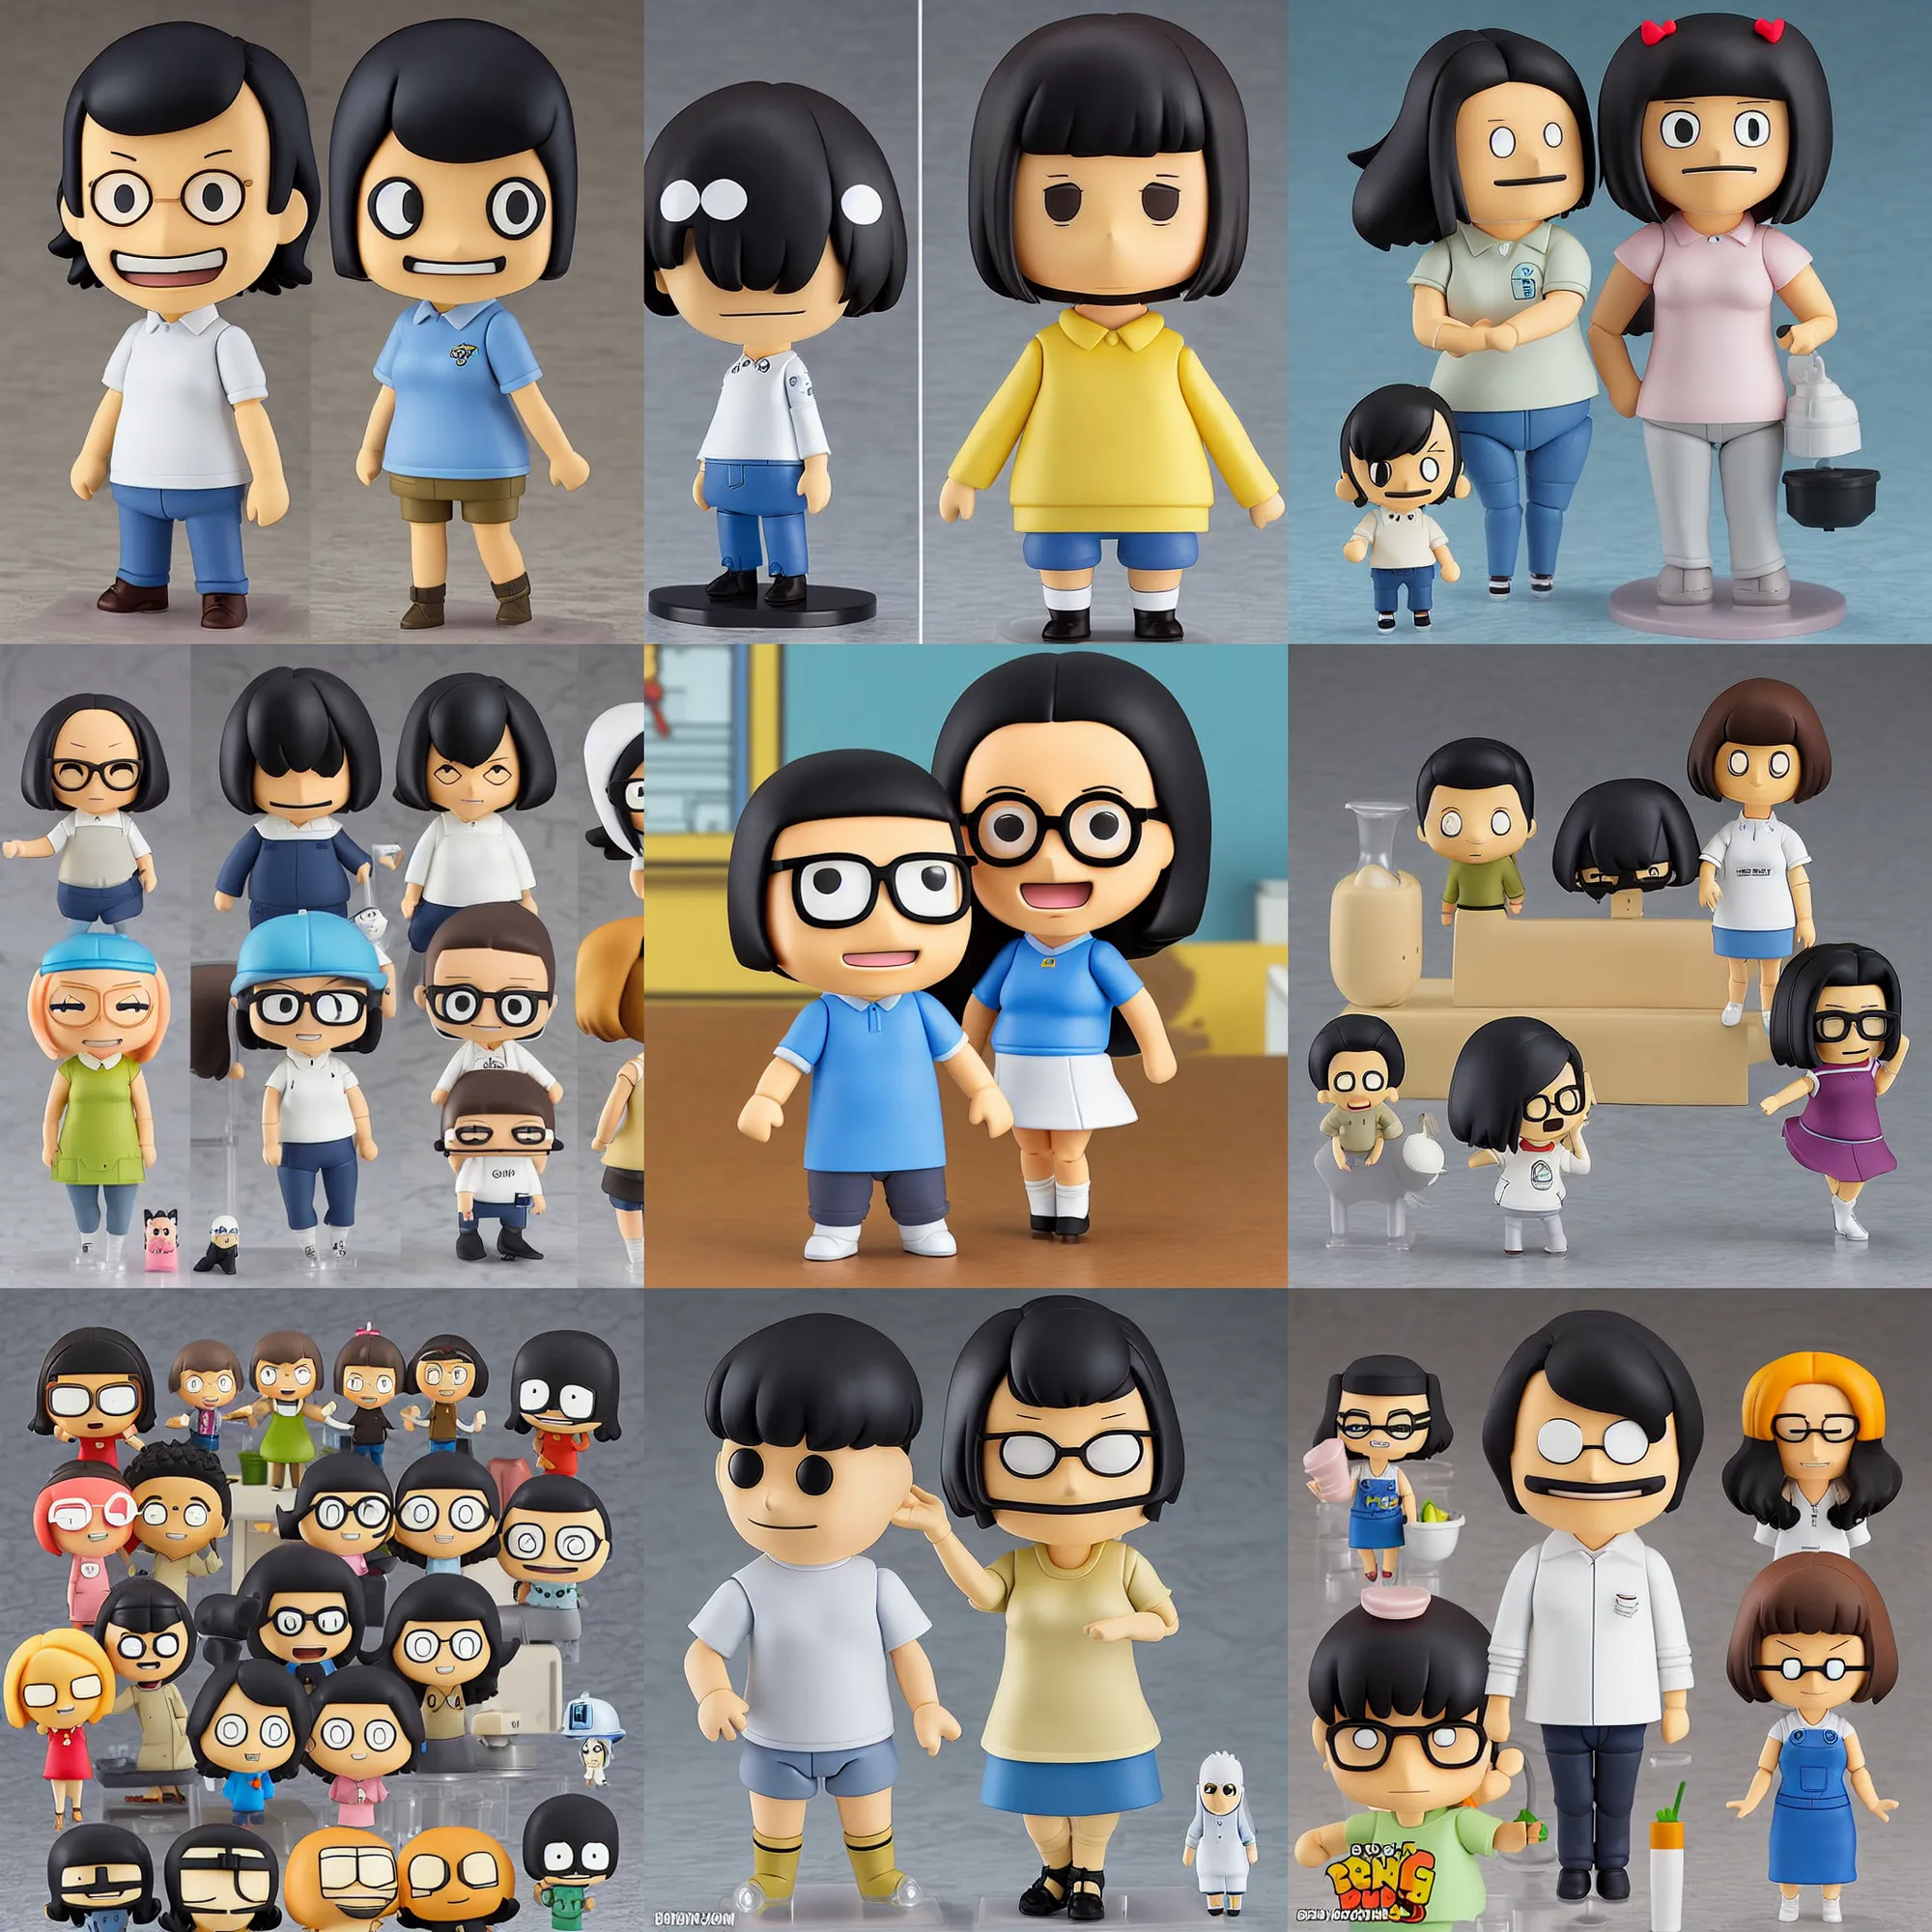 Bobs Burgers  Anime Style an art print by Jet Falco  INPRNT